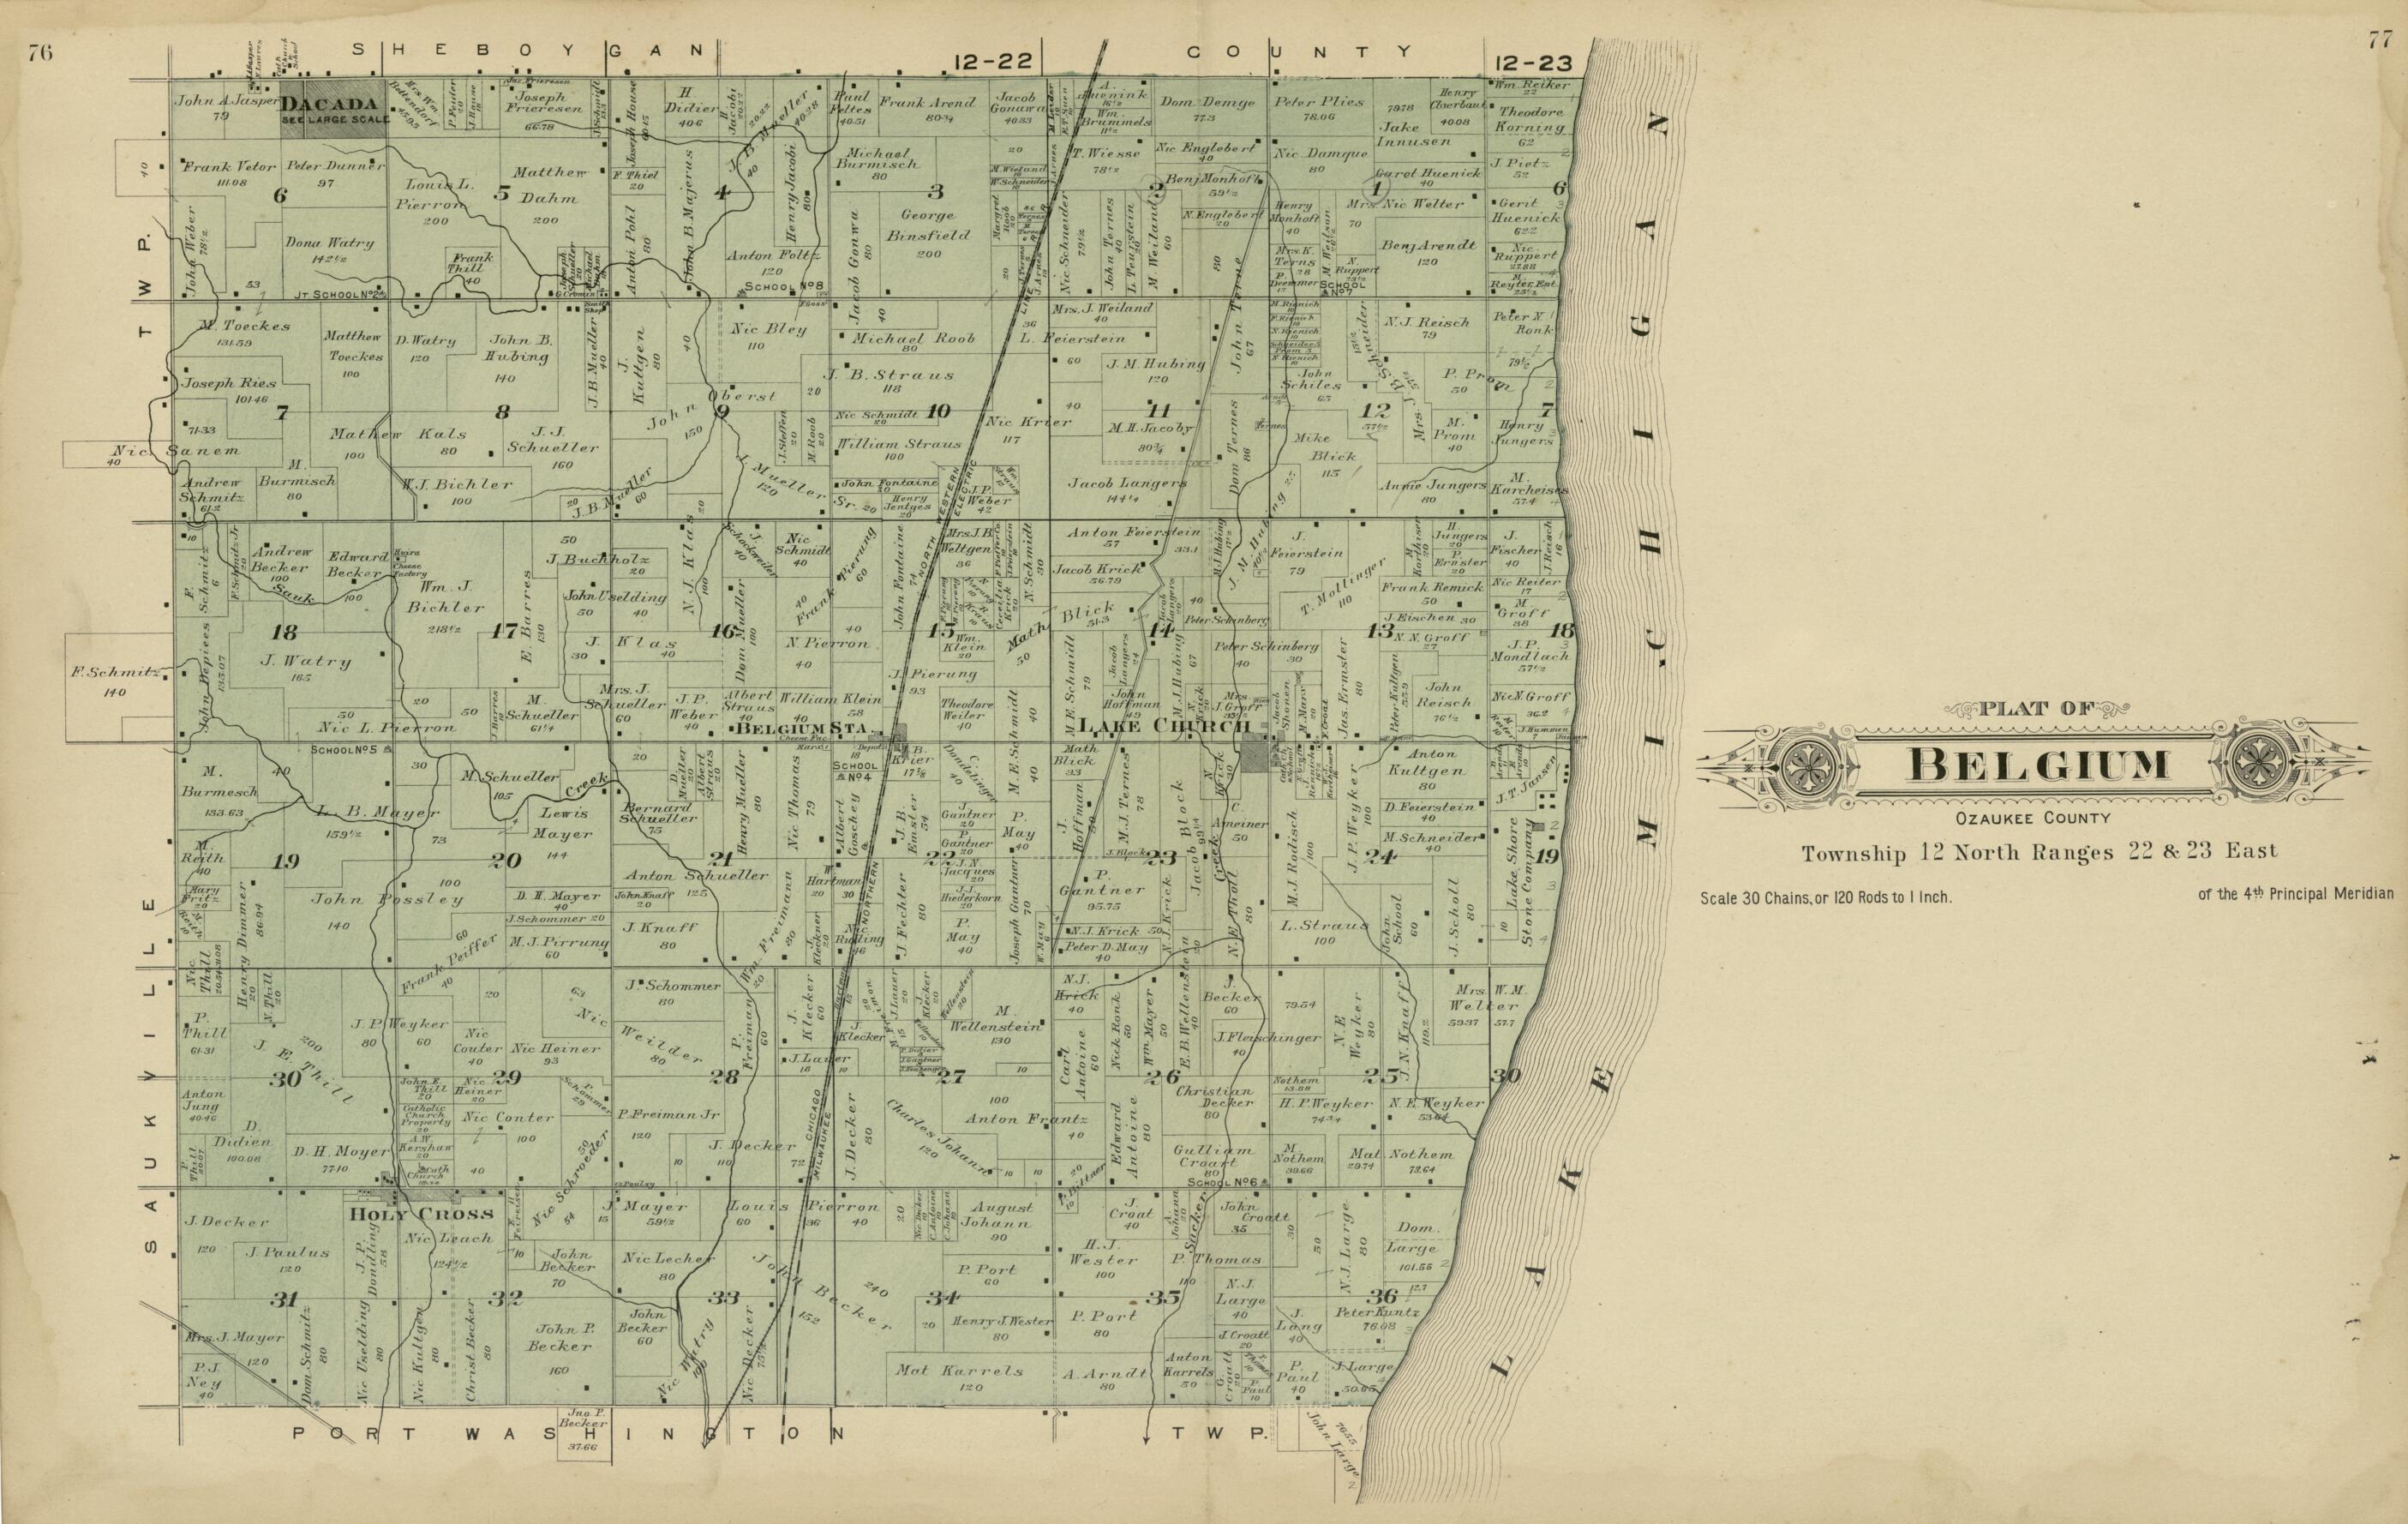 This old map of Plat of Belgium, Ozaukee County from Plat Book of Washington and Ozaukee Counties, Wisconsin from 1915 was created by Albert Volk in 1915